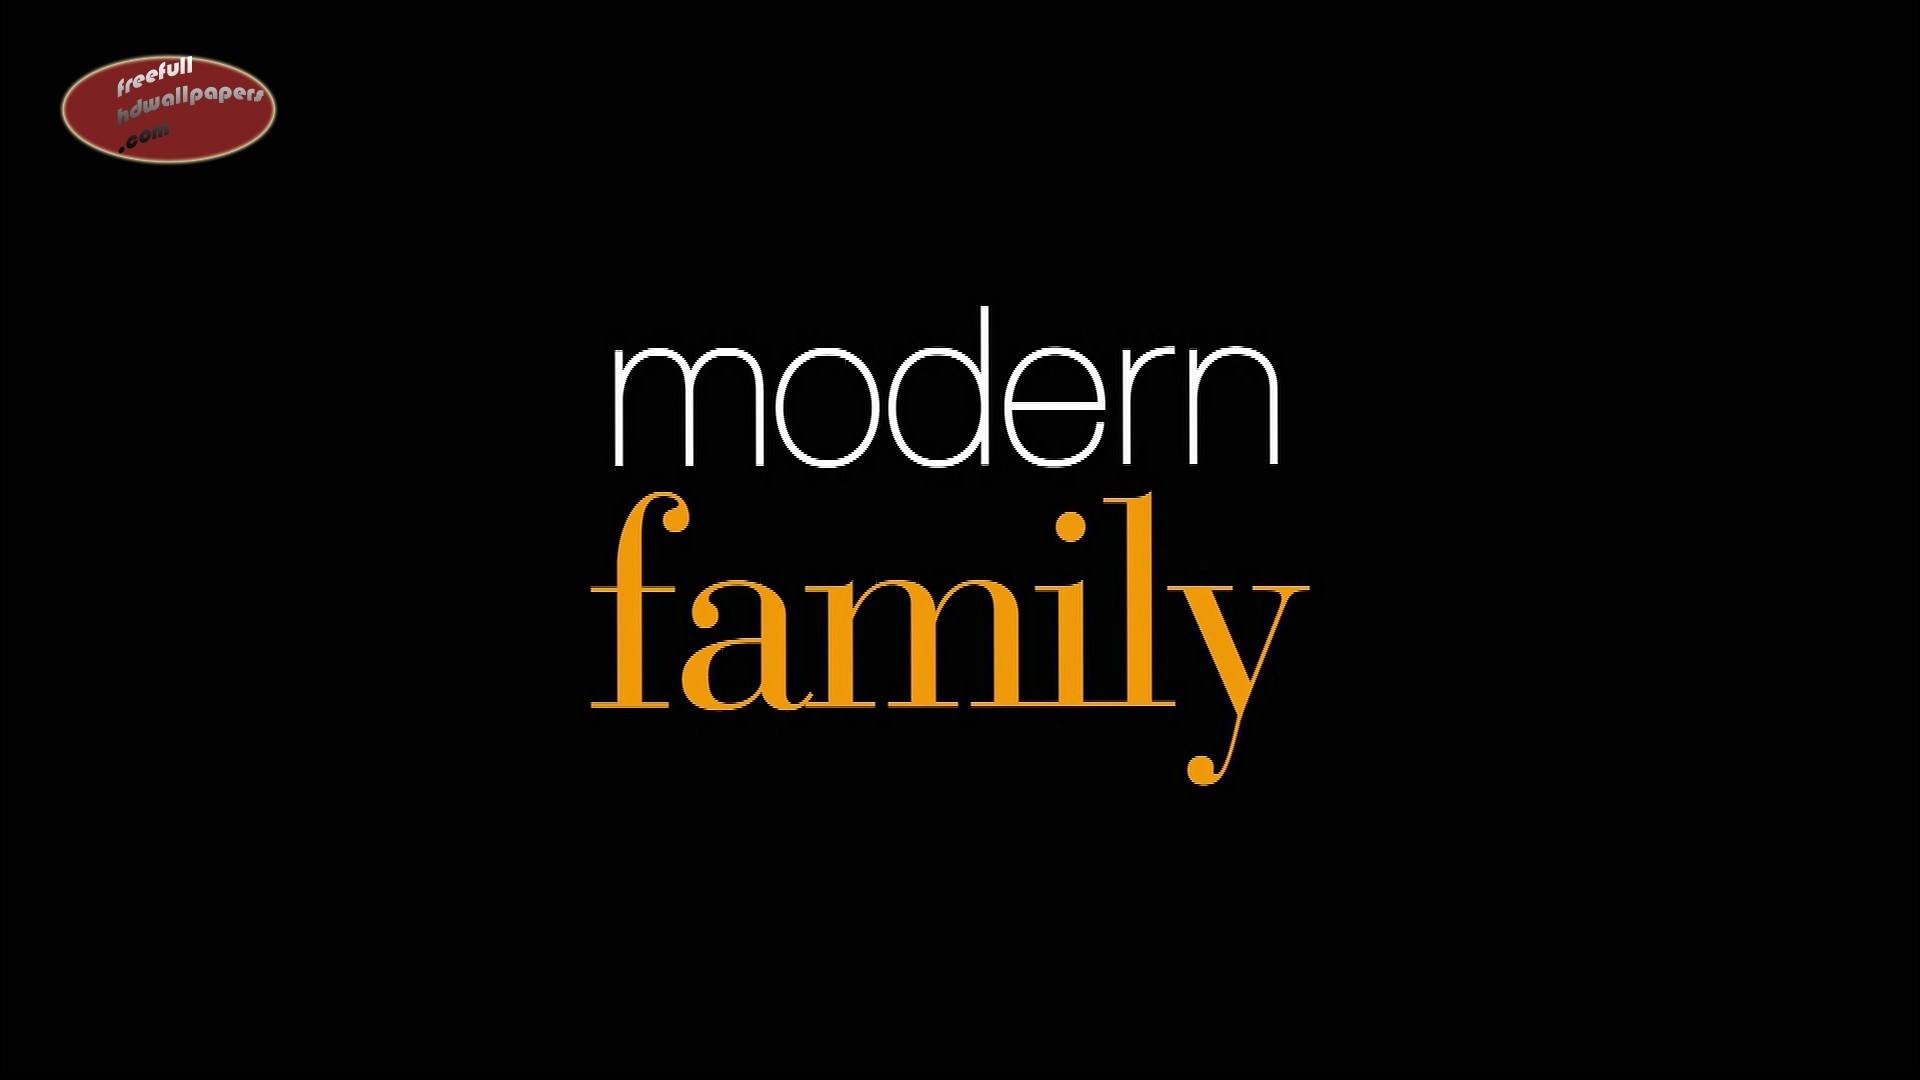 General 1920x1080 Modern Family TV series simple background black background